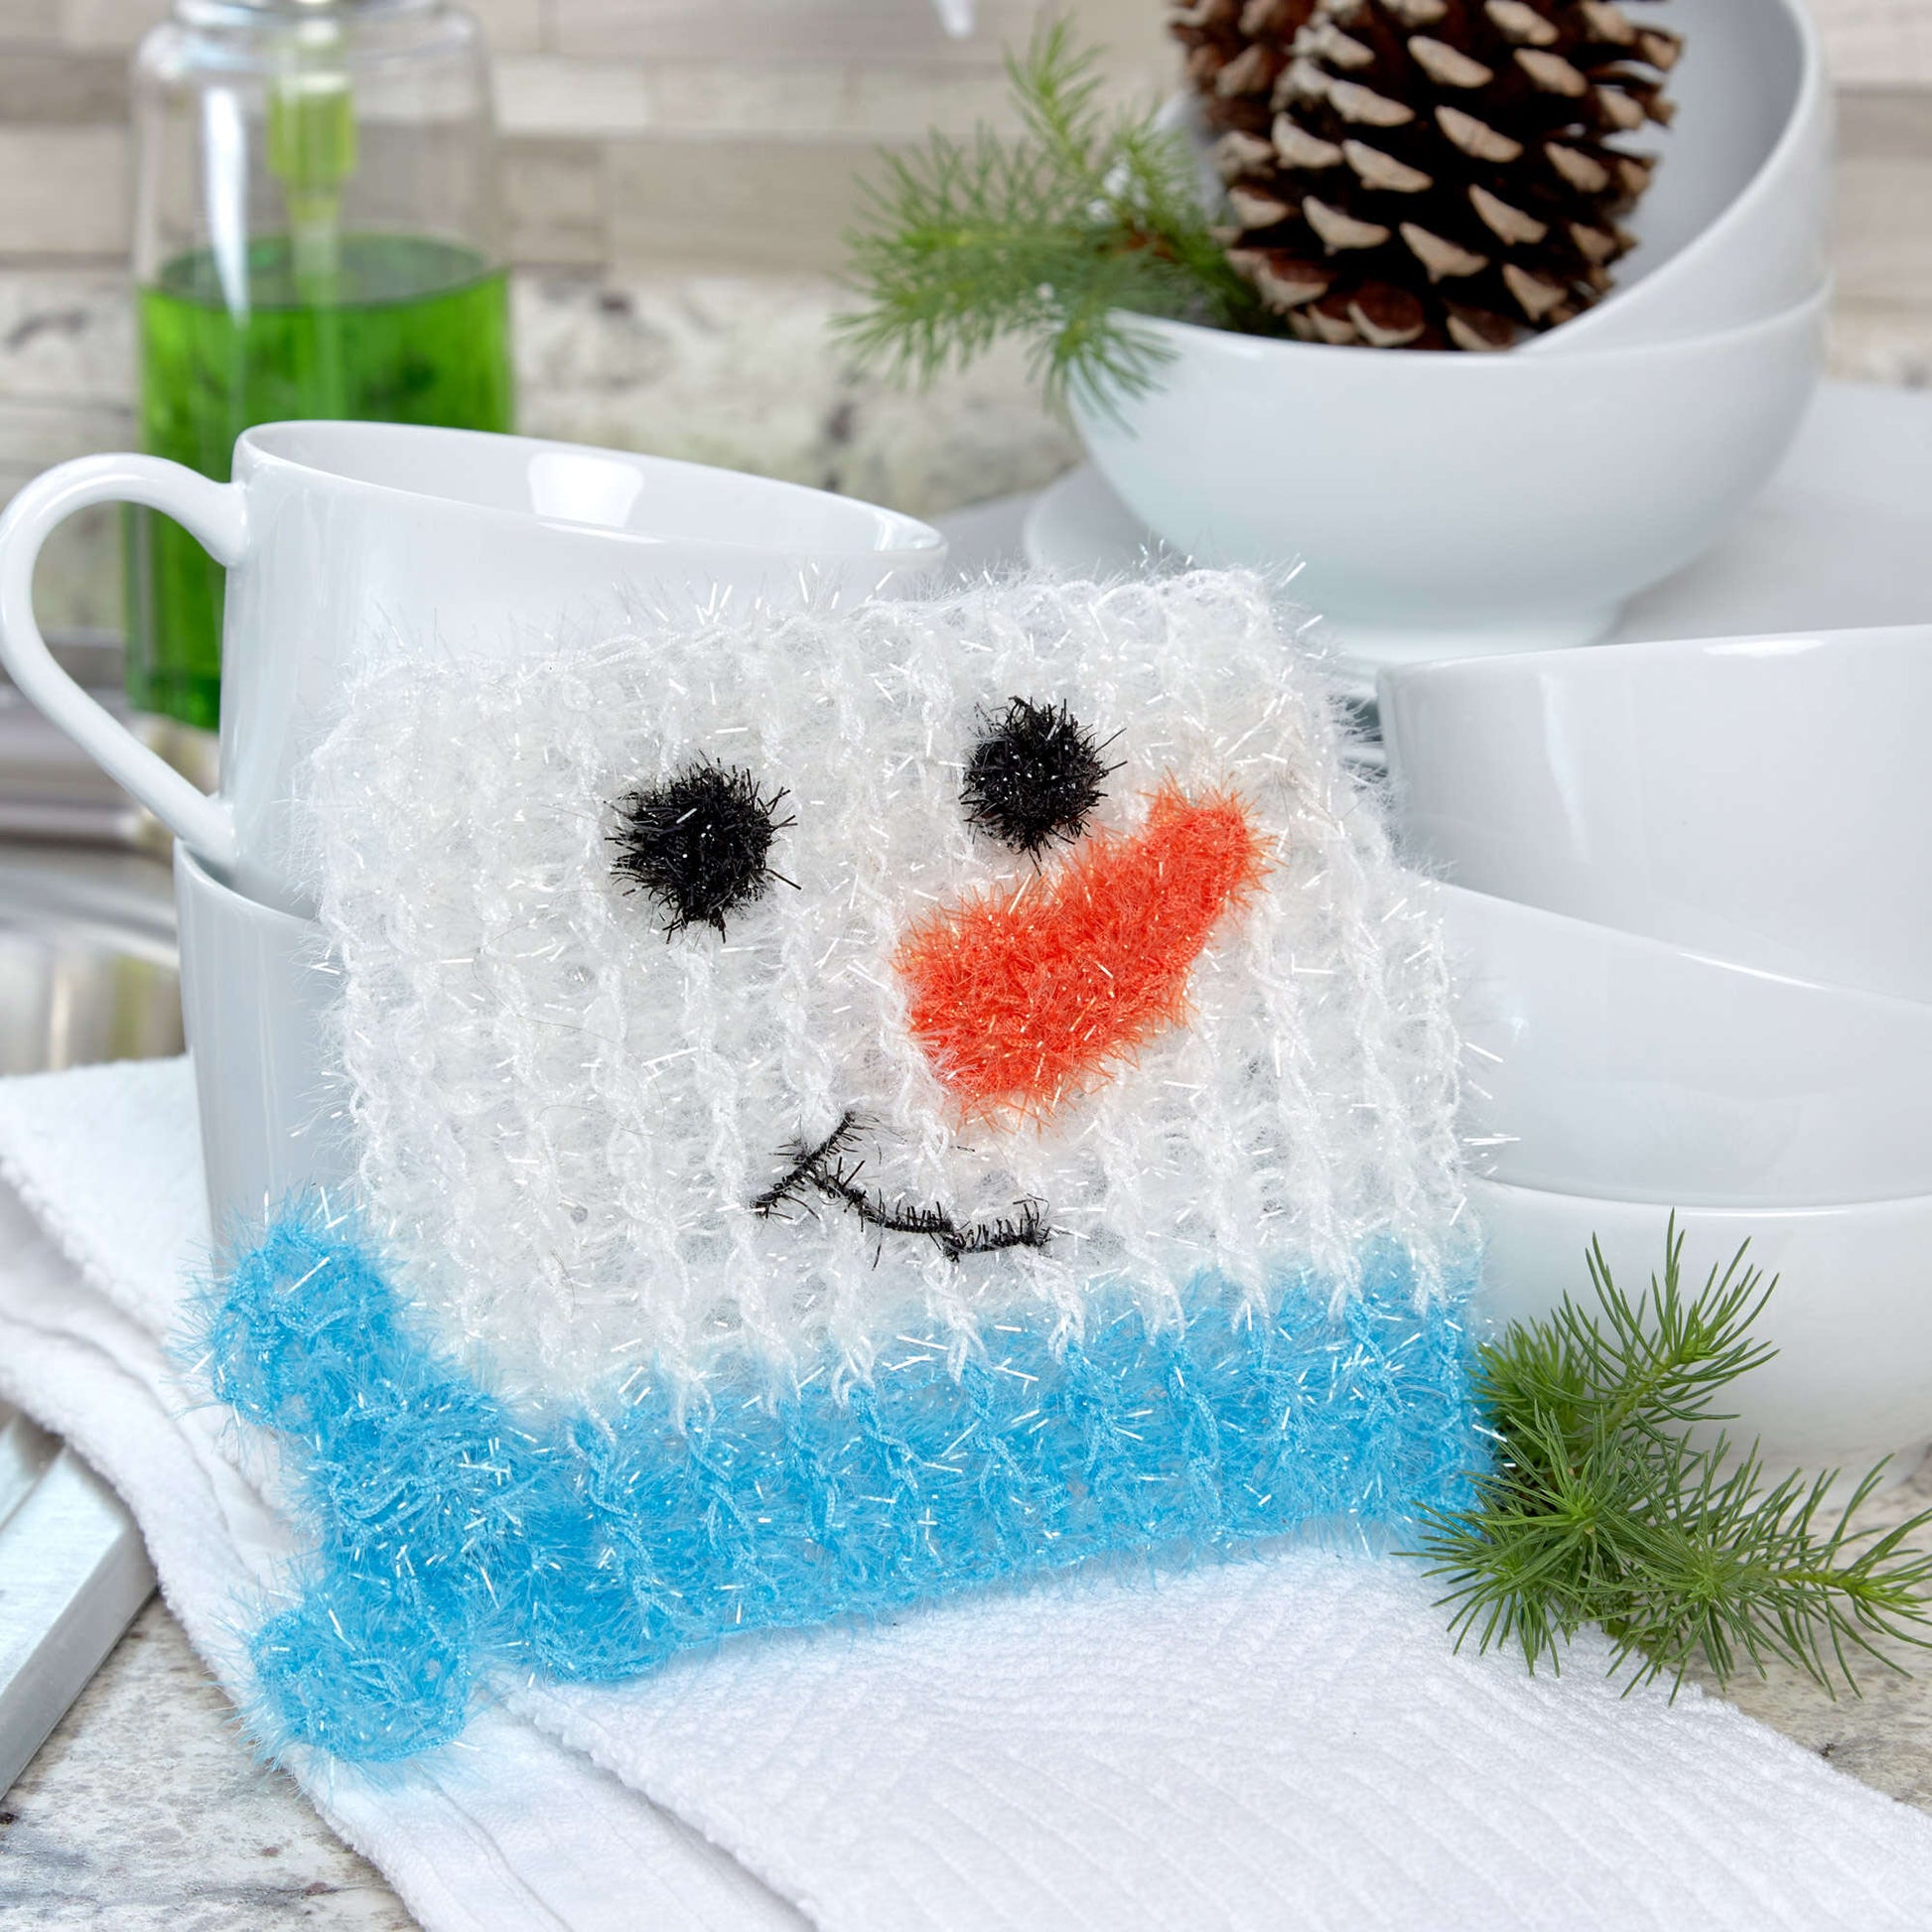 Free Red Heart Crochet Snowman In The Square Scrubby Pattern